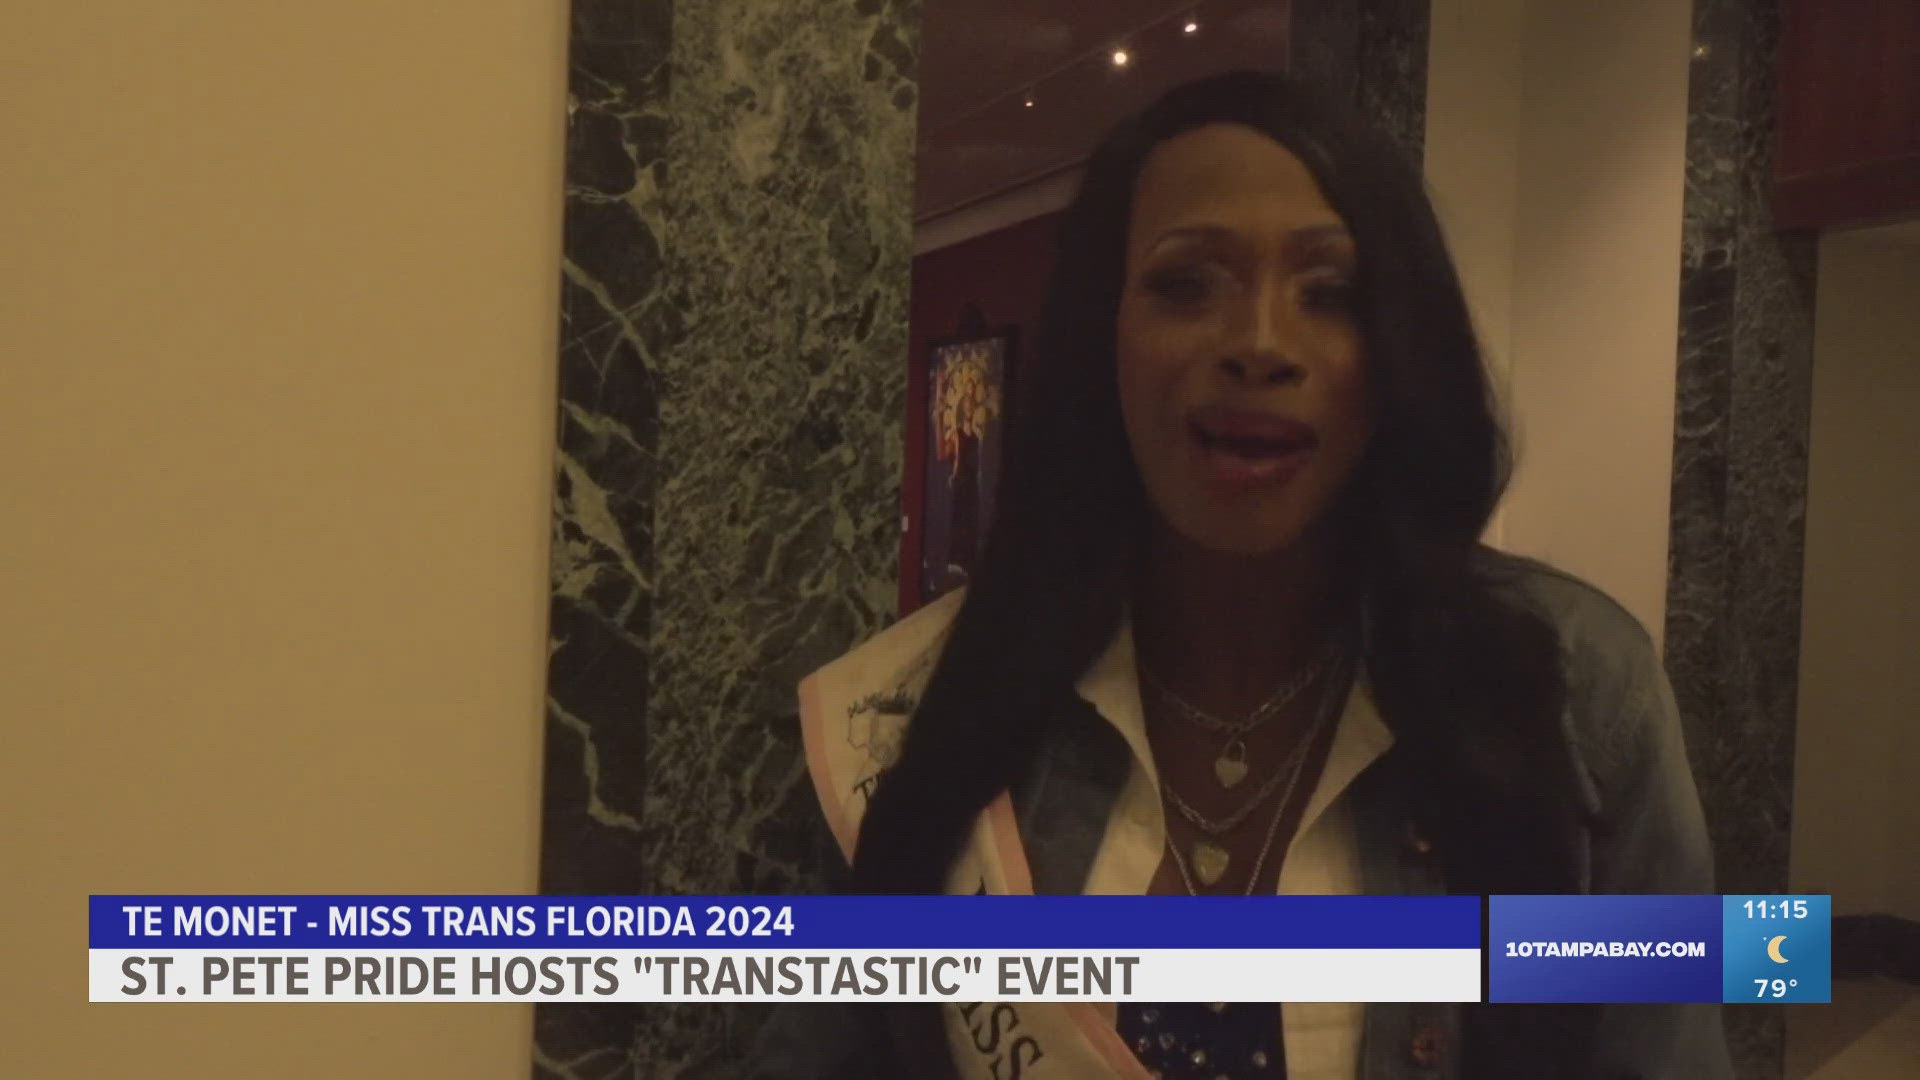 The event was aimed at ensuring access to trans healthcare is protected.